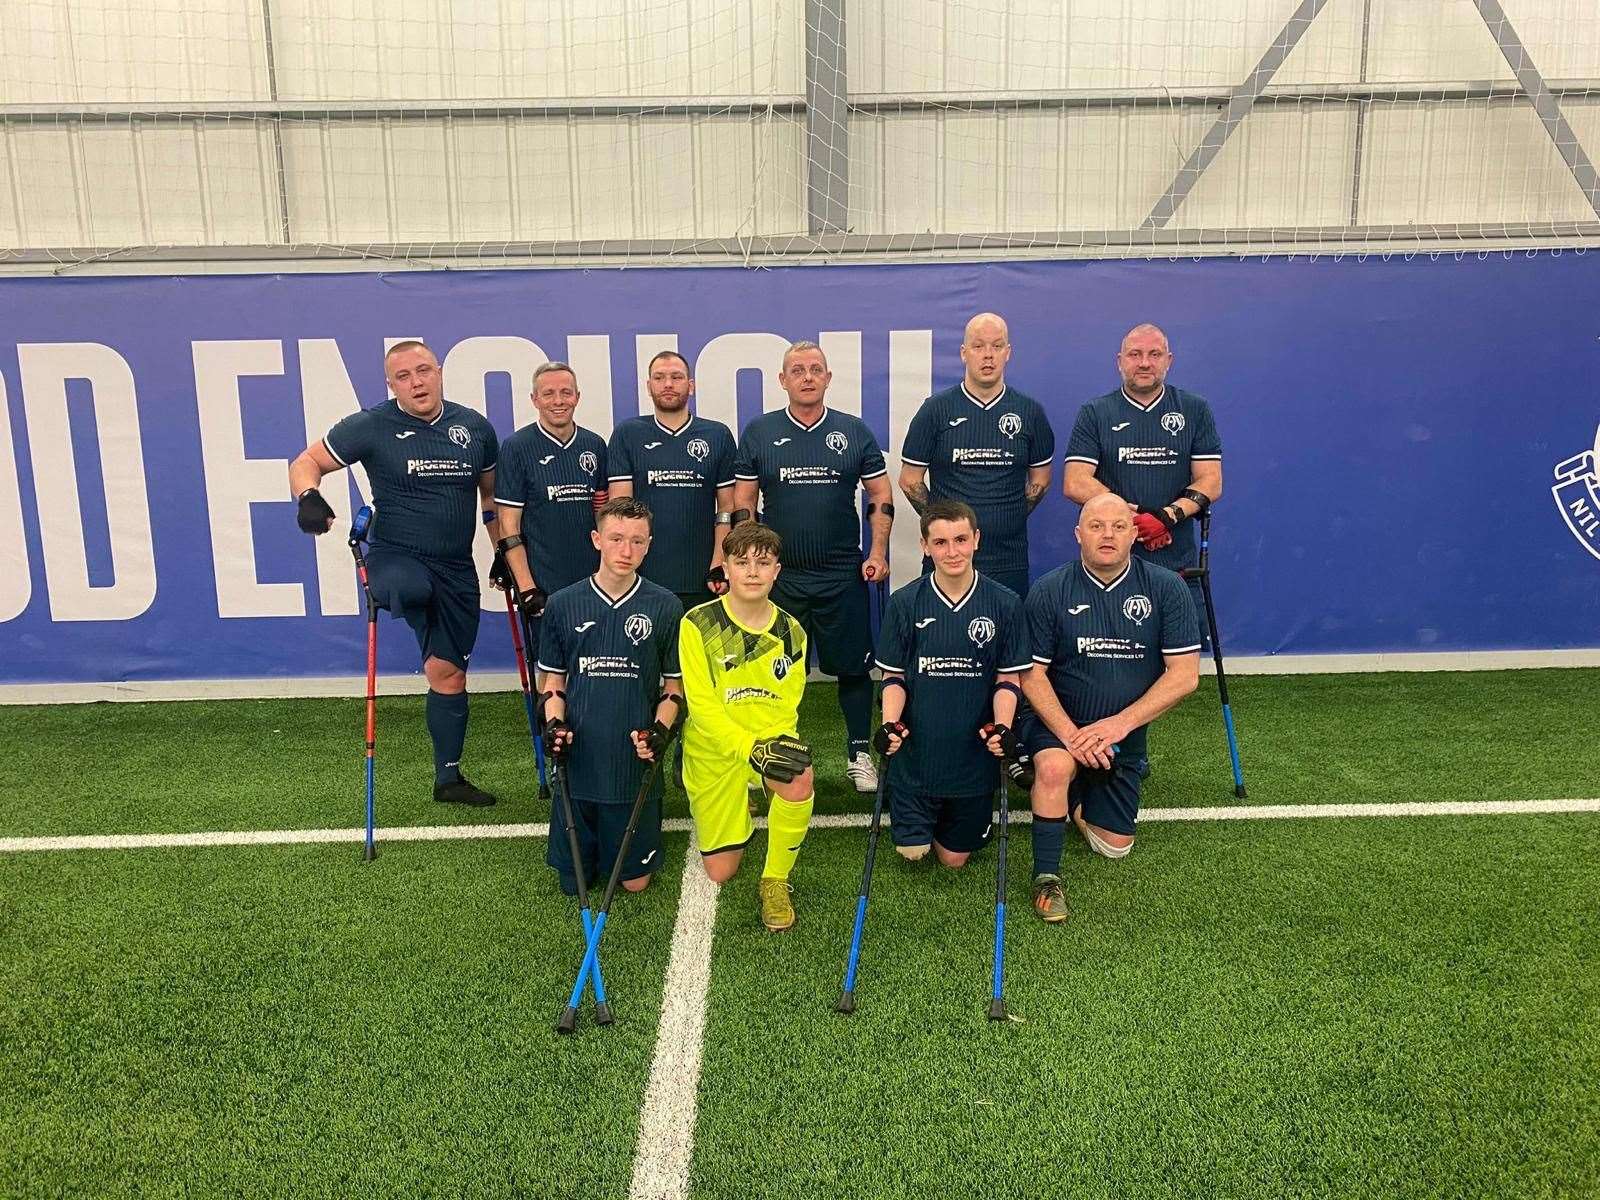 Connor Elliot is a member of the Amputee Football Association Scotland (Connor and Pauline Elliot/PA)